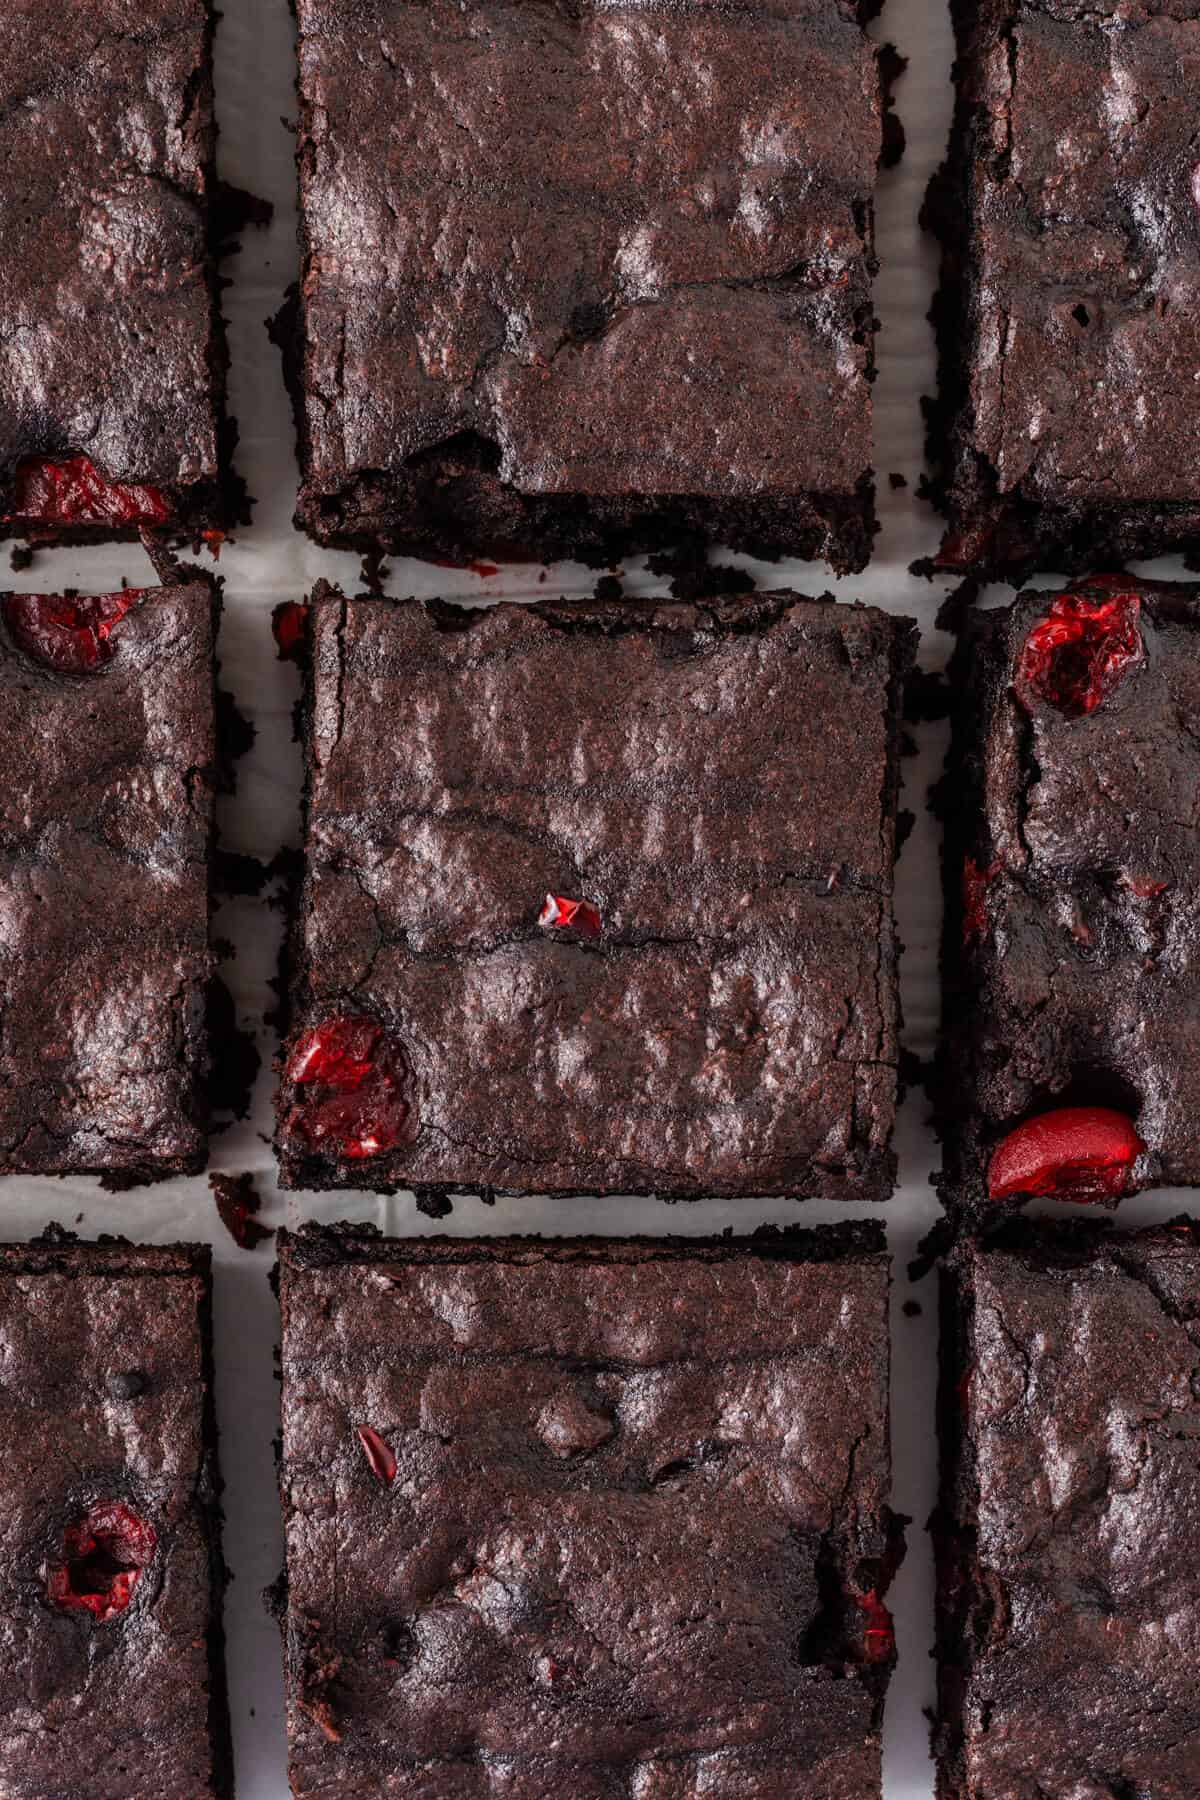 Cherry chocolate brownies cut into squares.